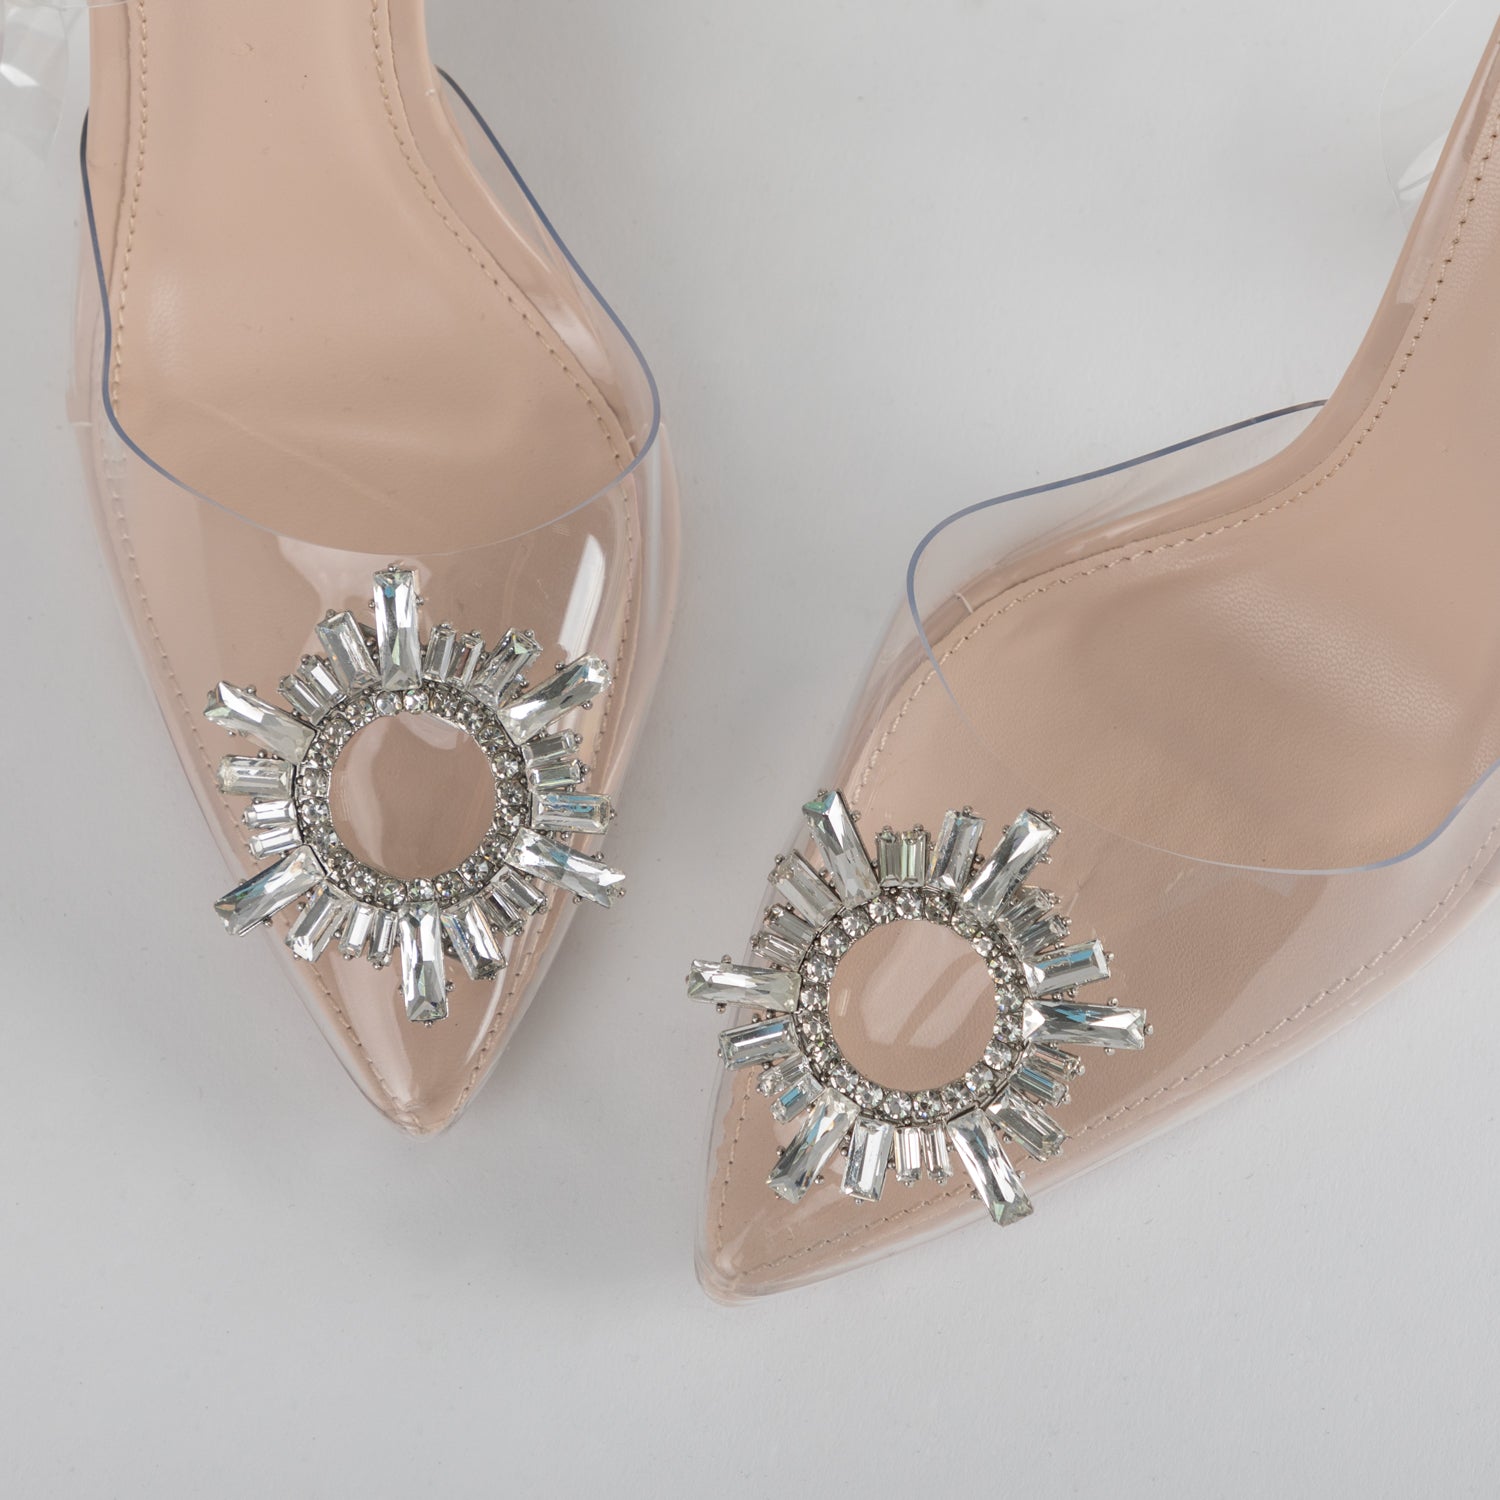 RAID Sterling Barely There Heel in Nude